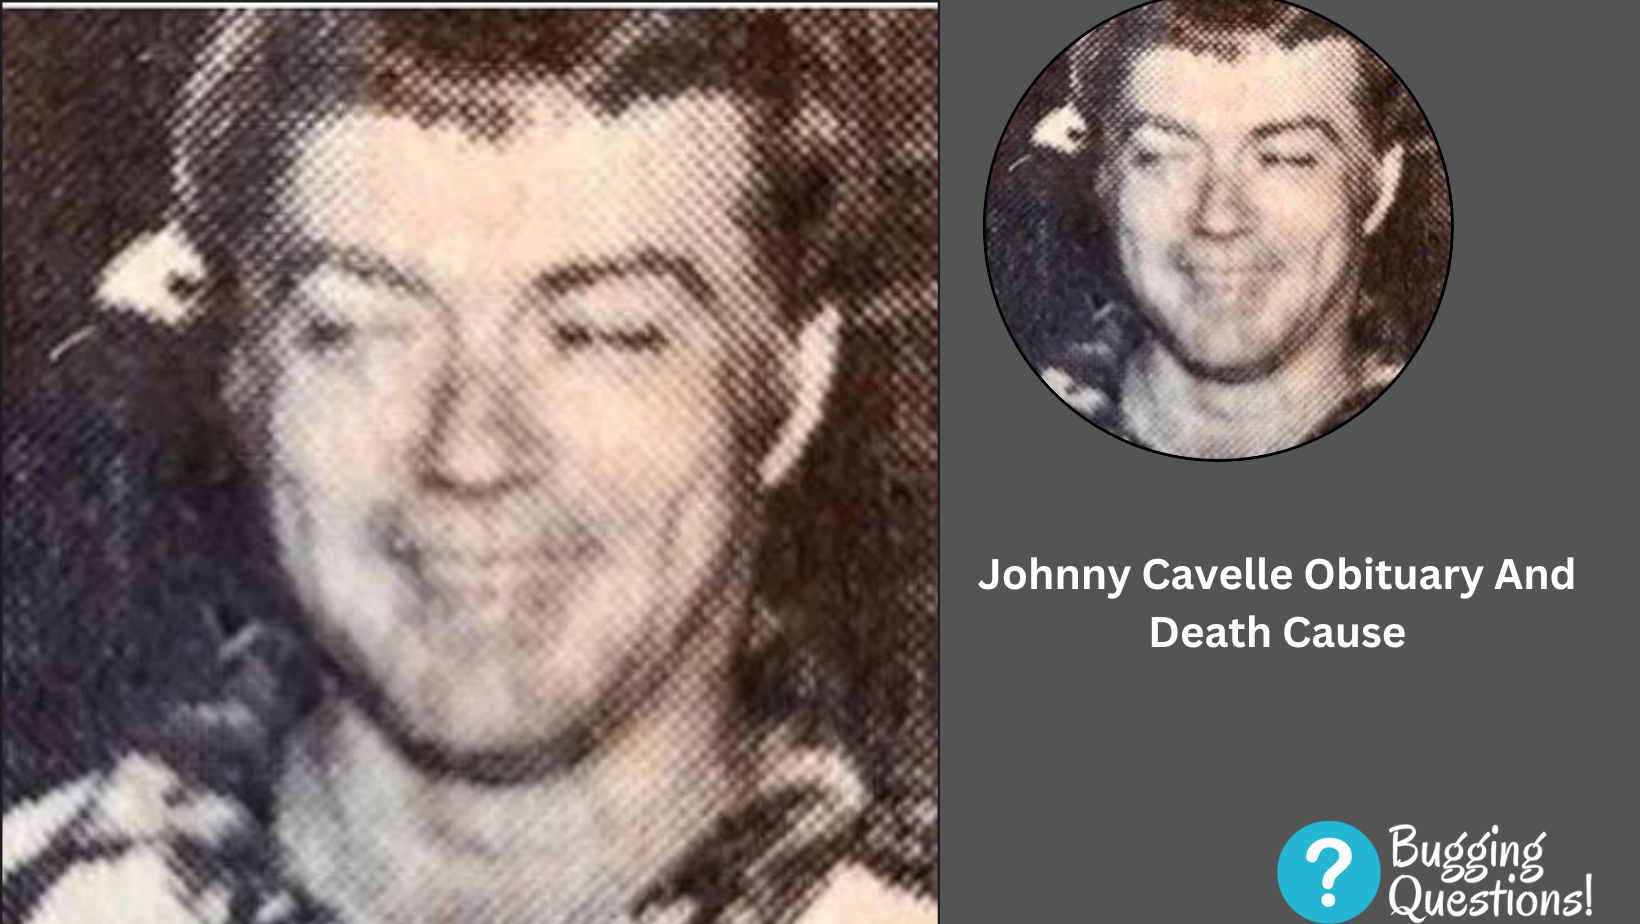 Johnny Cavelle Obituary And Death Cause